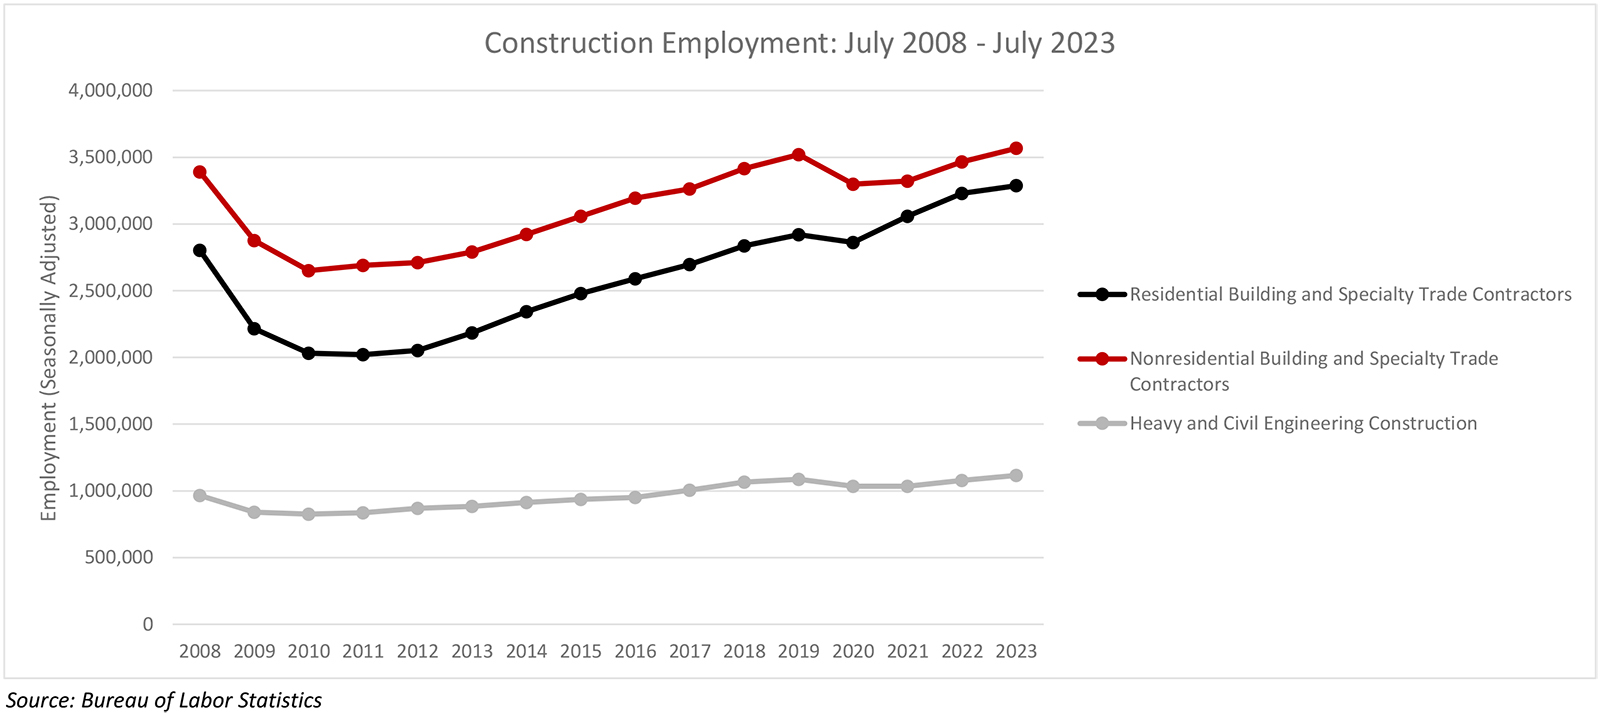 Nonresidential Construction Employment Increased in July